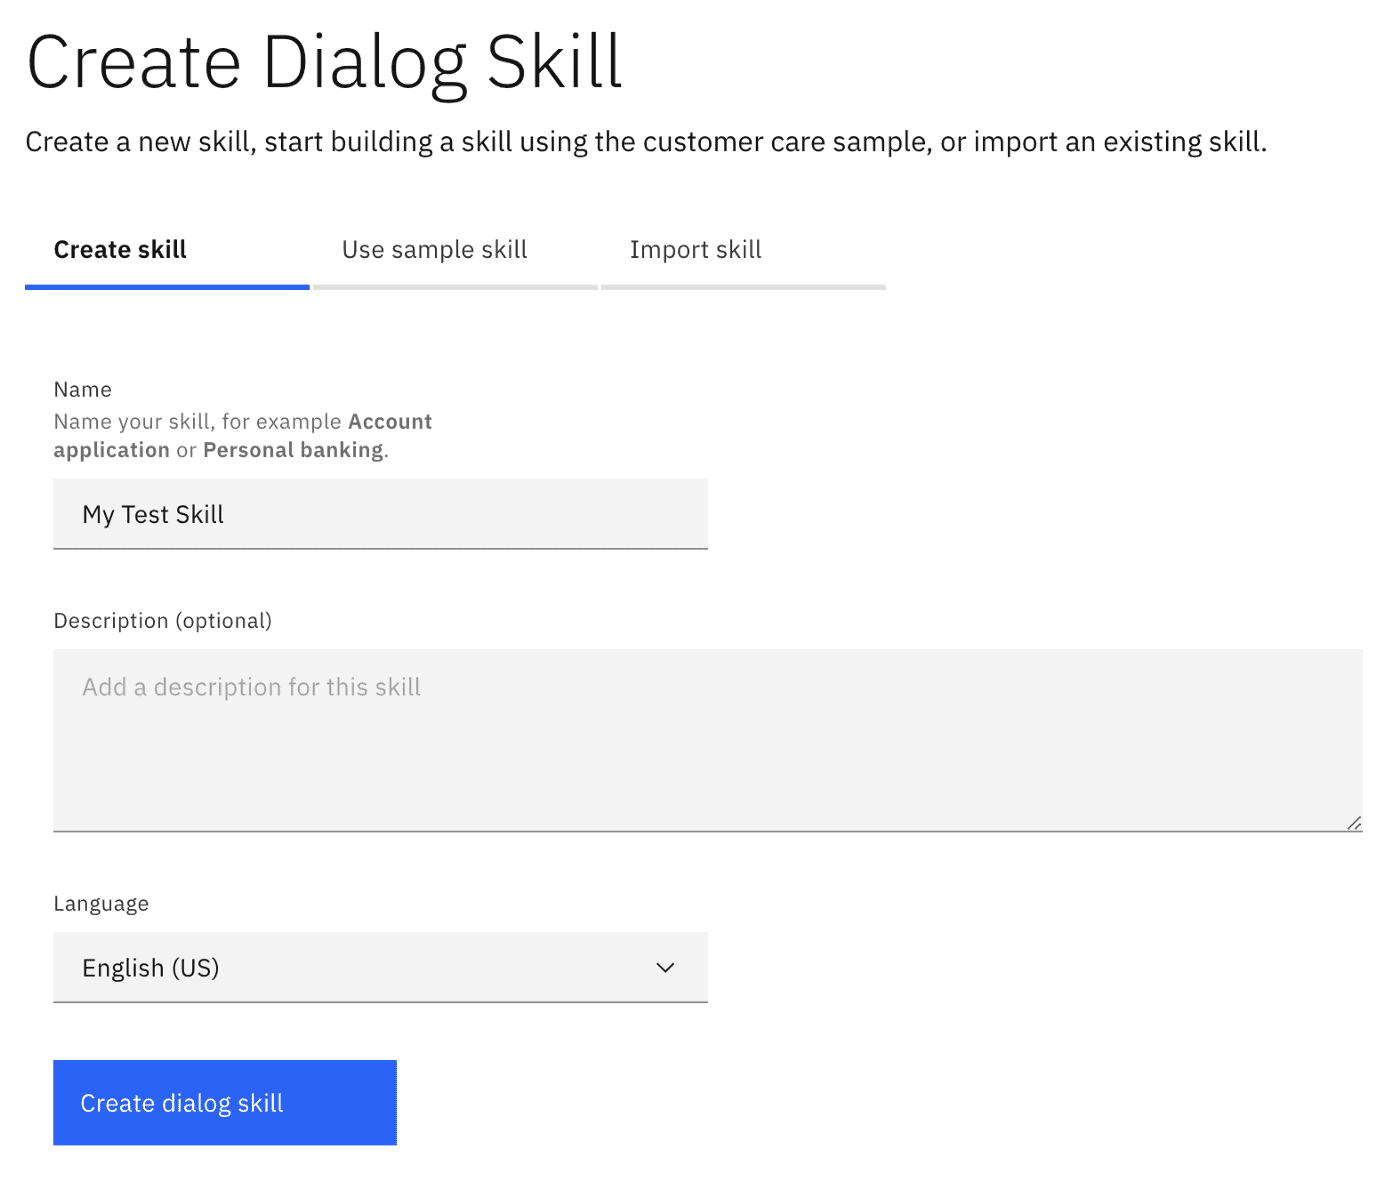 IBM's Watson Assistant's create dialog skill interface